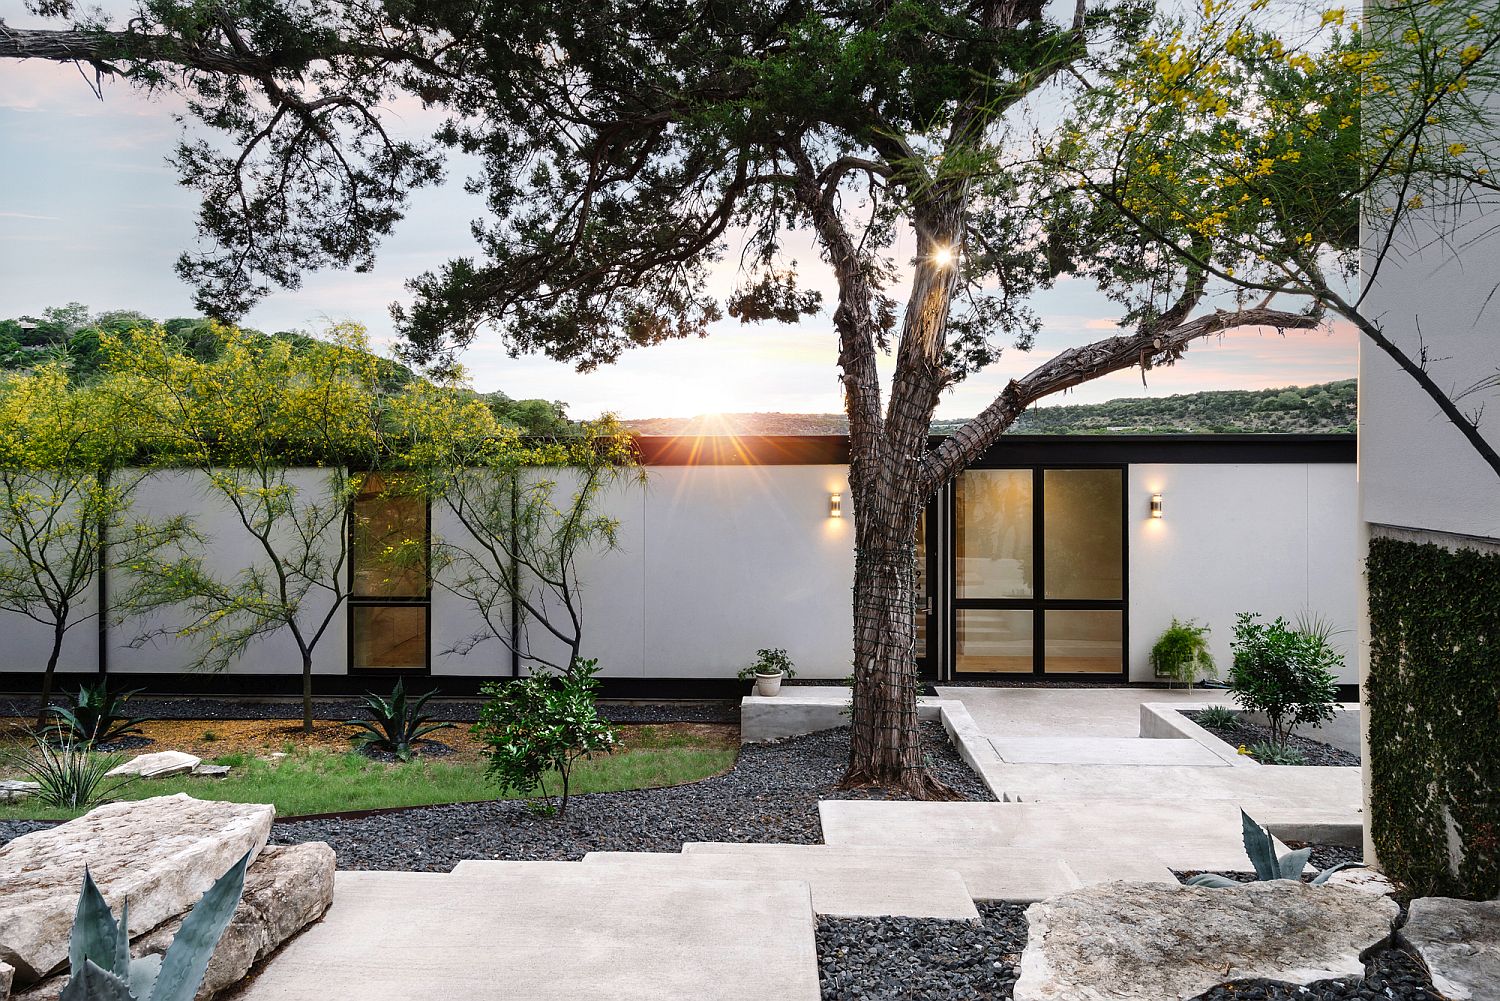 Modern-Texas-hillside-home-with-a-design-inspired-by-the-iconic-Farnsworth-house